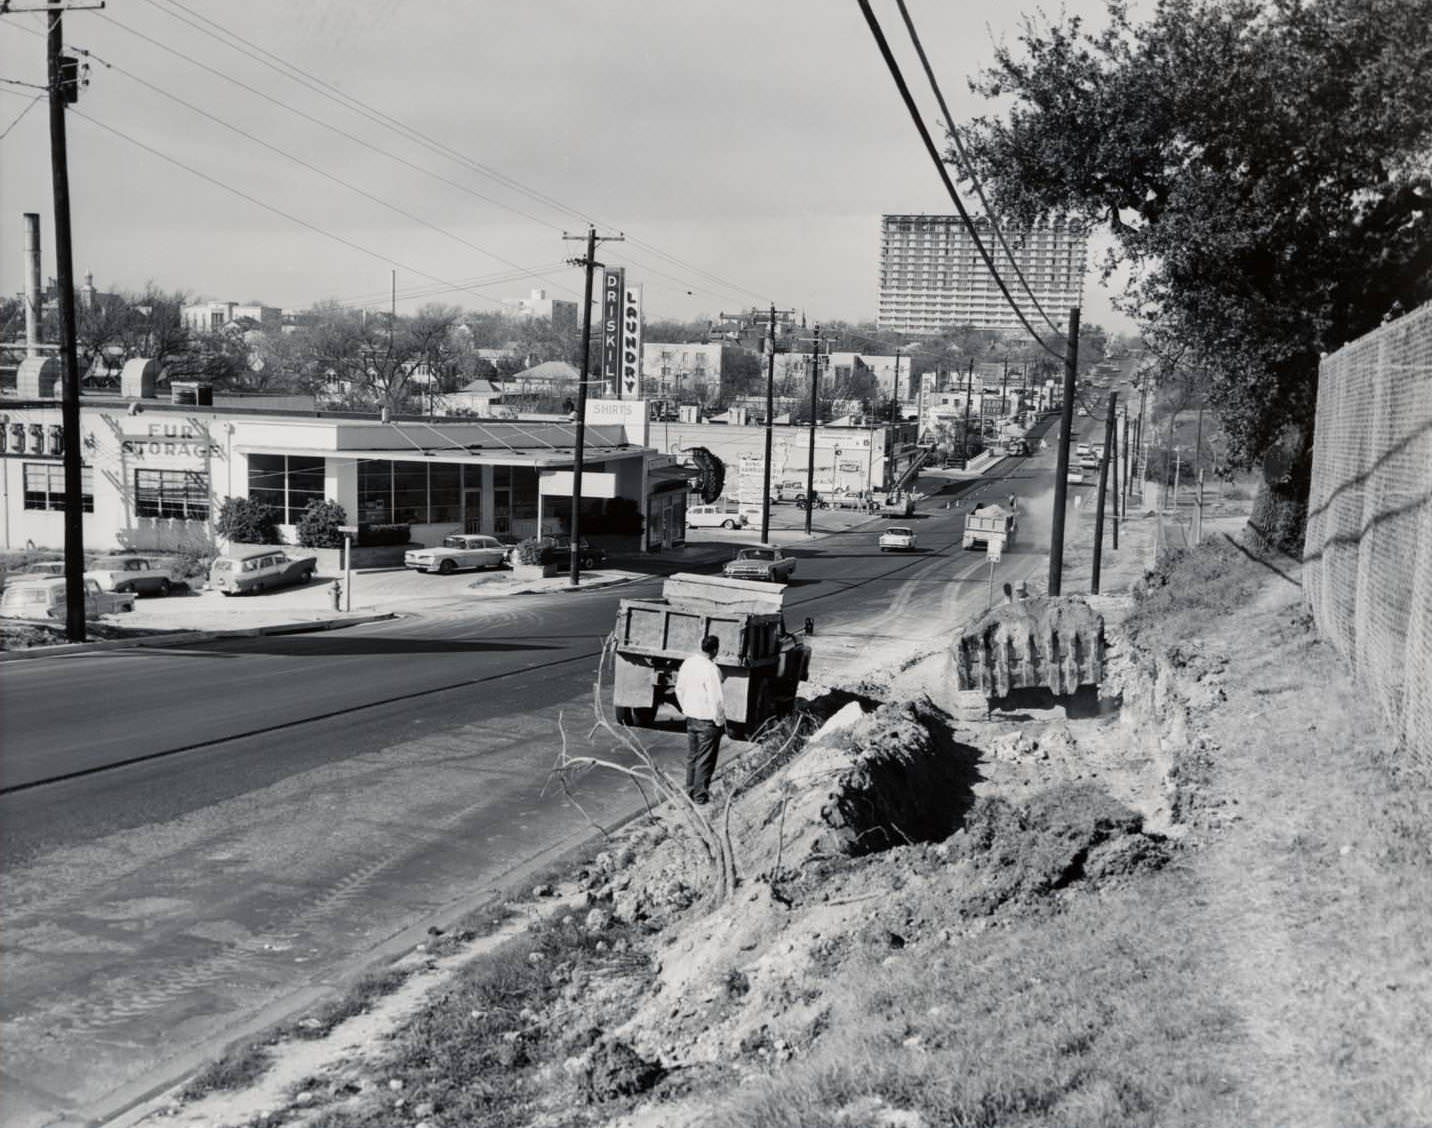 The 19th Street (now Martin Luther King Jr Blvd.) looking west from about Trinity, 1960 .Buildings line the left side of the street and construction vehicles and workers are on the right side.